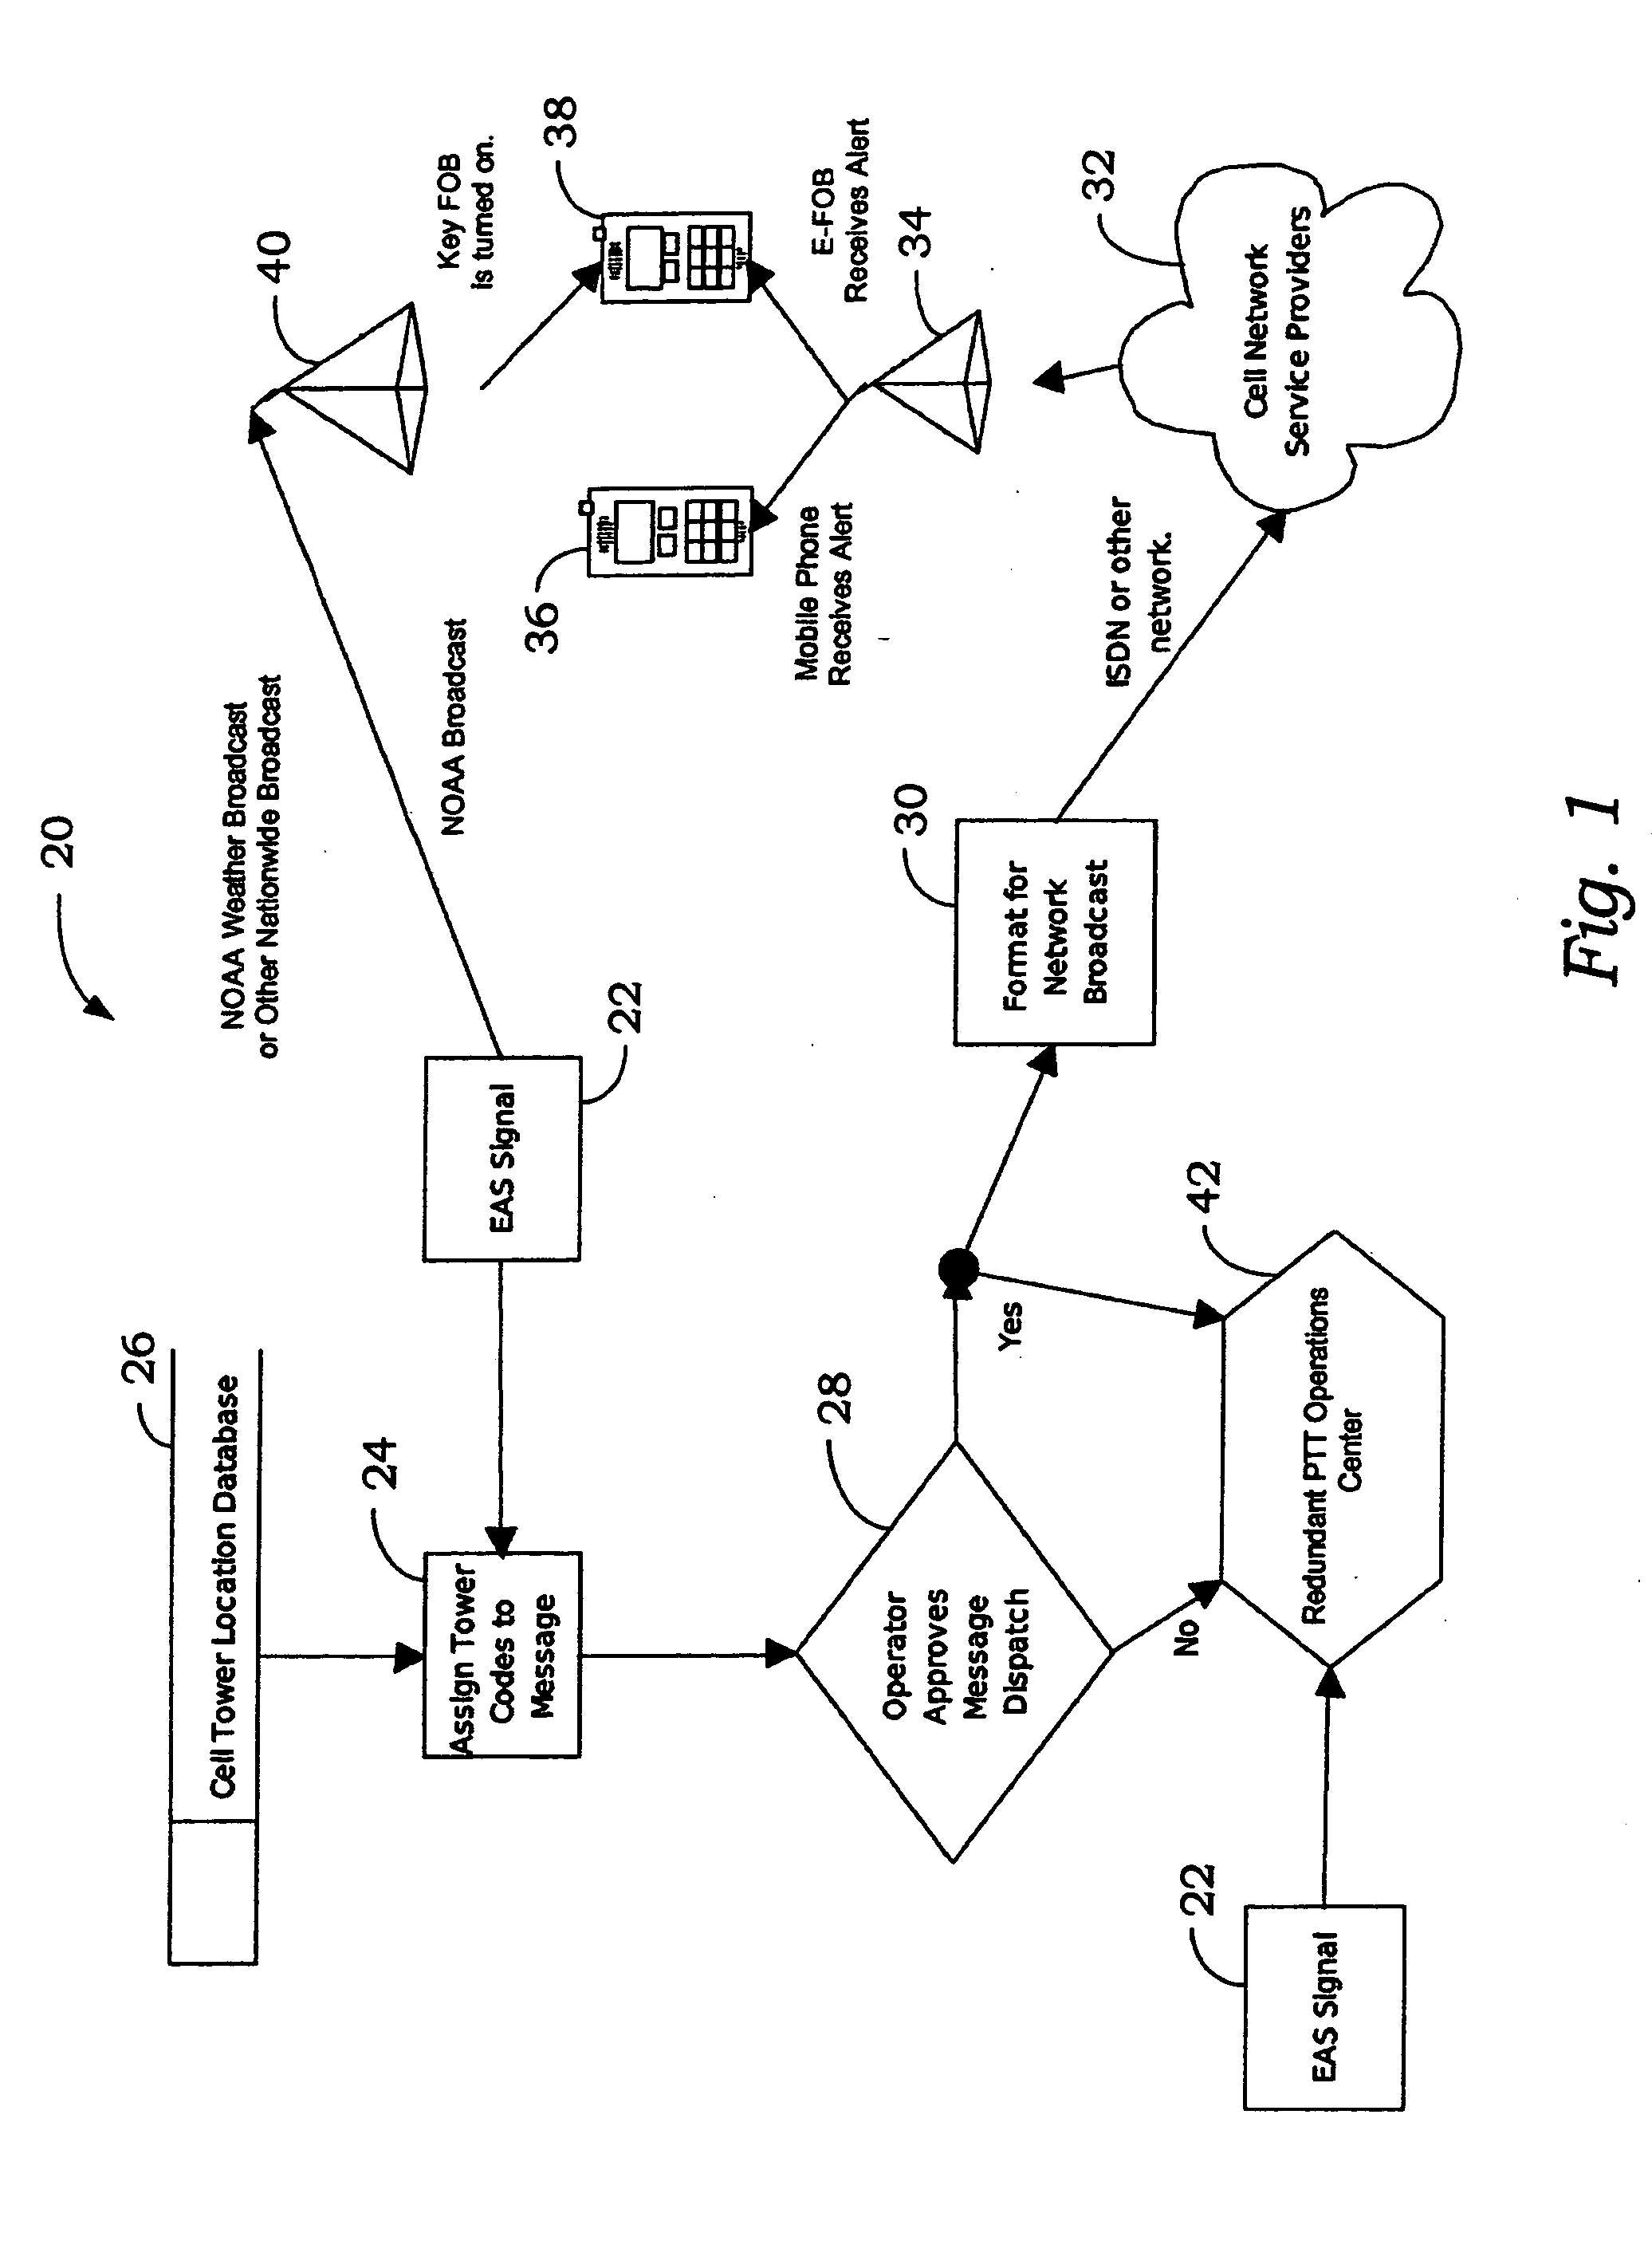 Alert system and personal apparatus